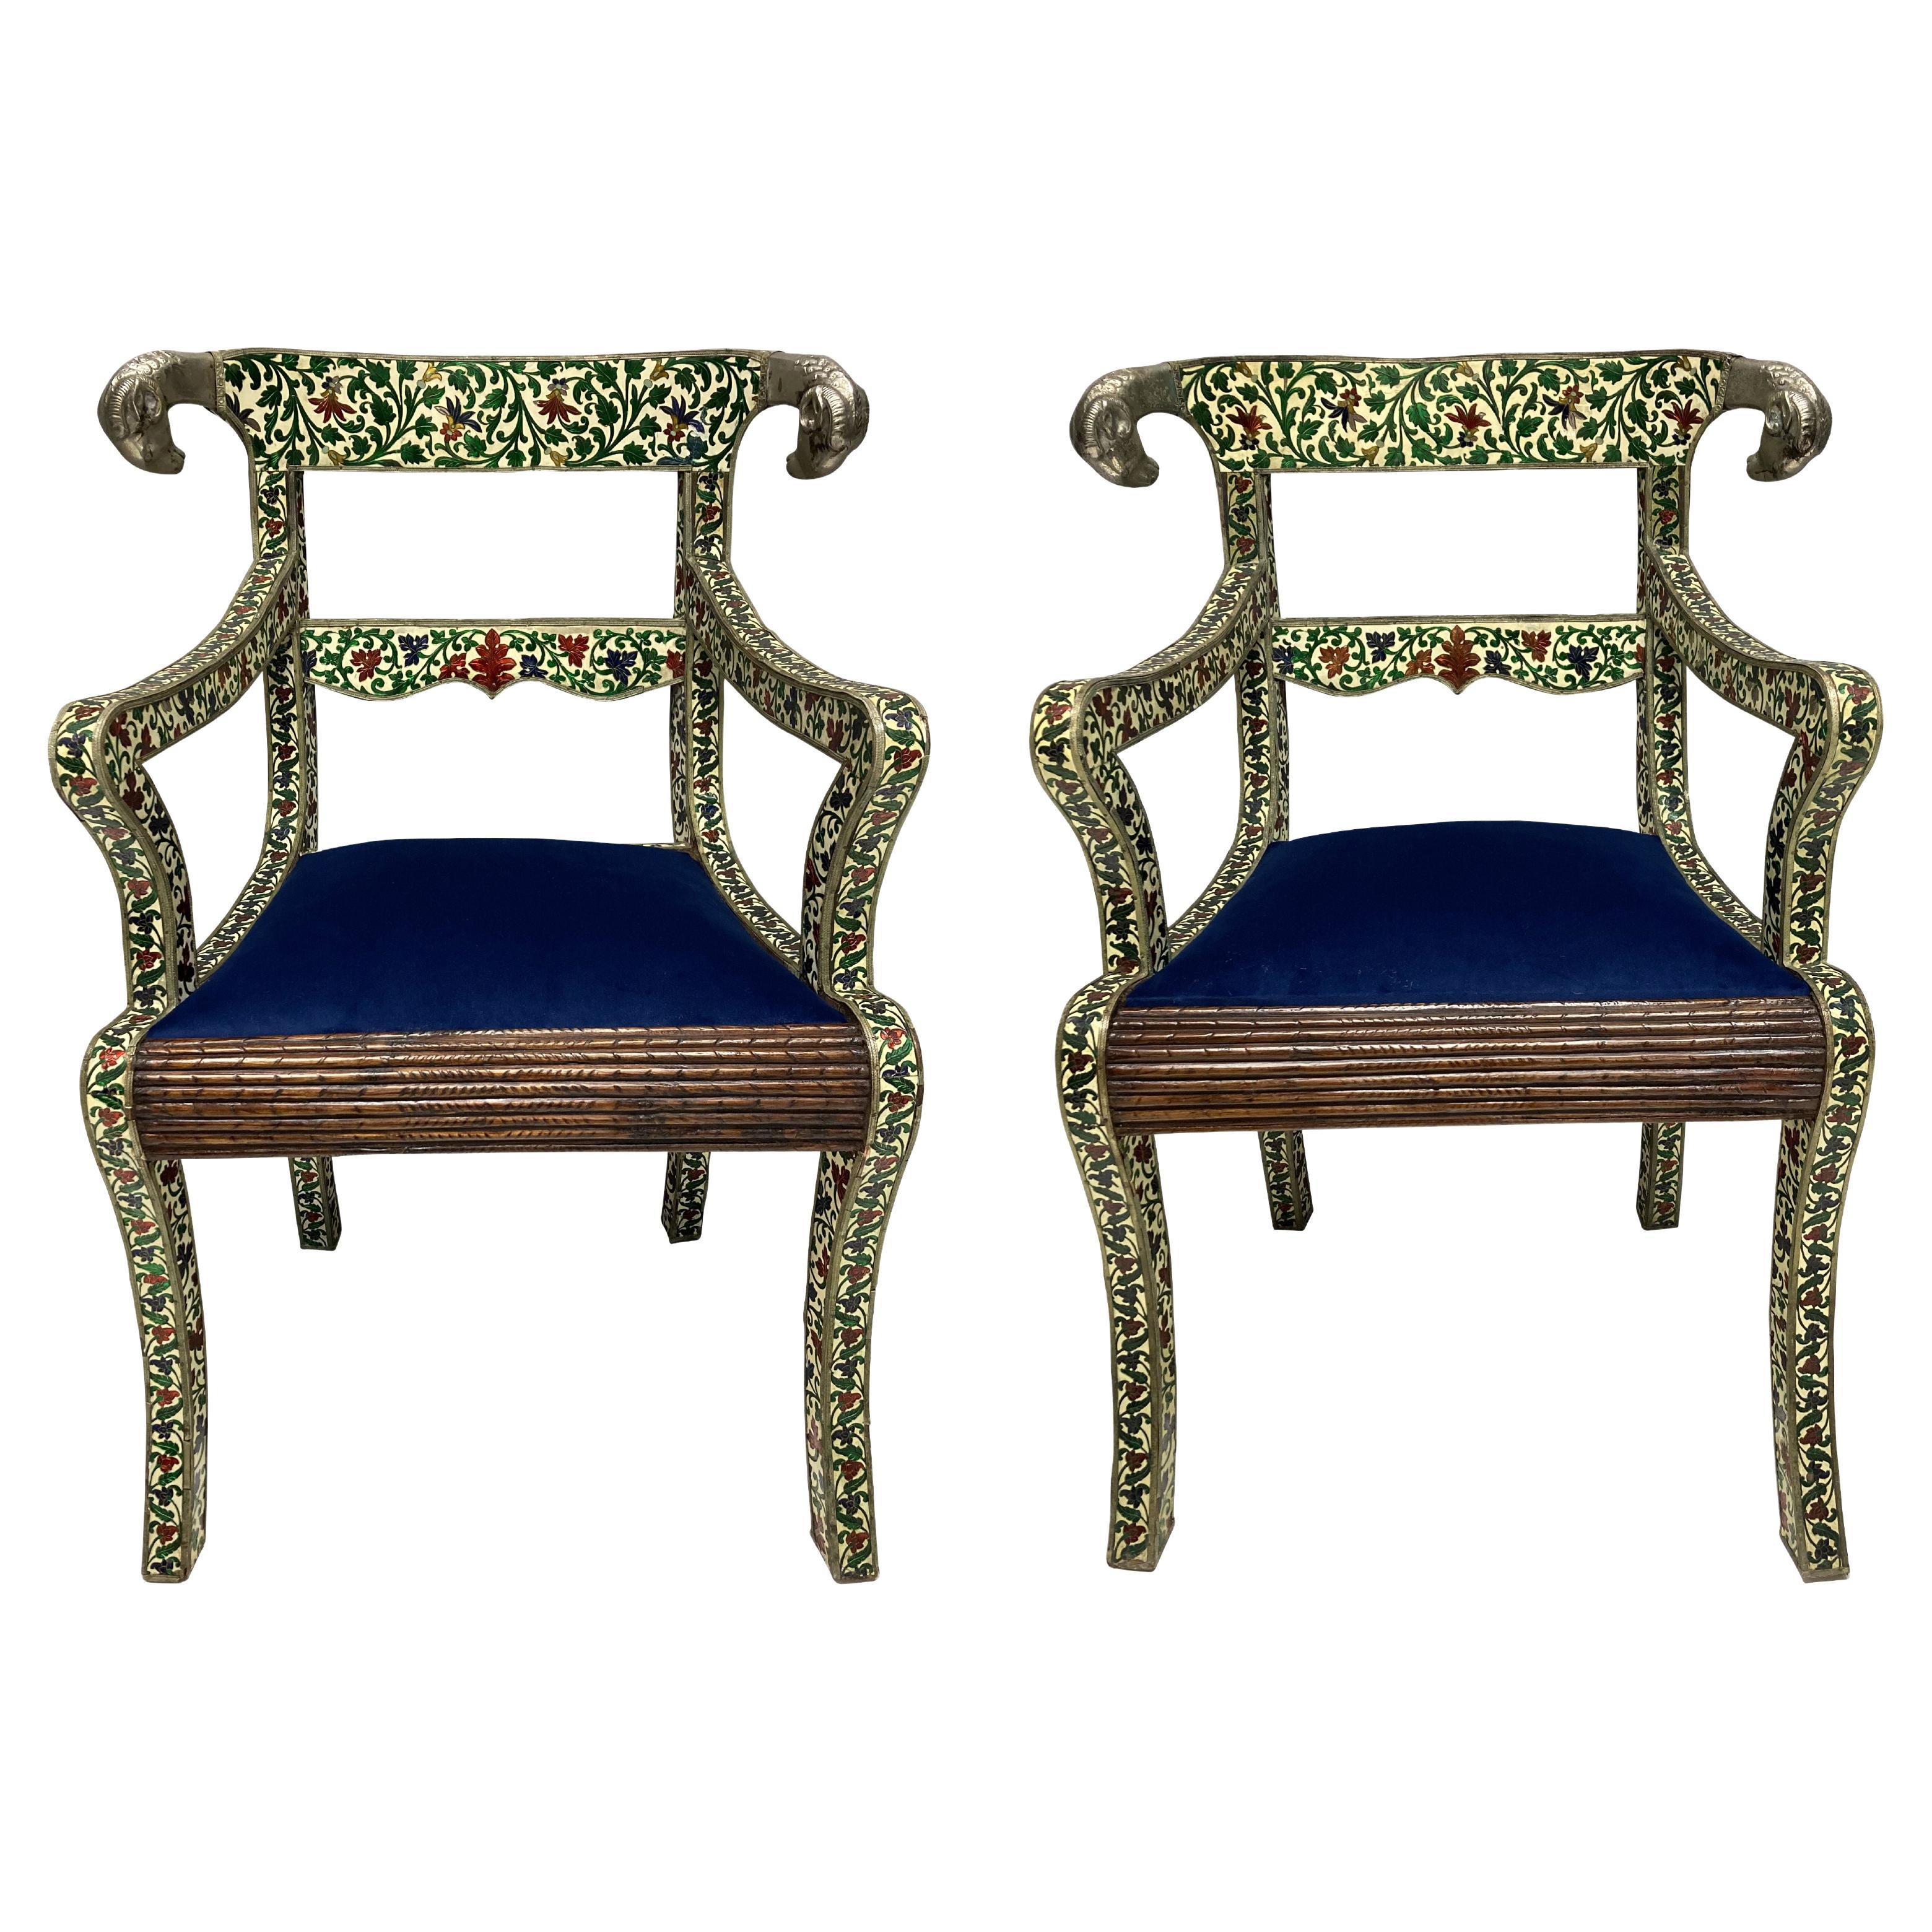 Pair of Rare Indian Cloisonne & Silver Armchairs For Sale